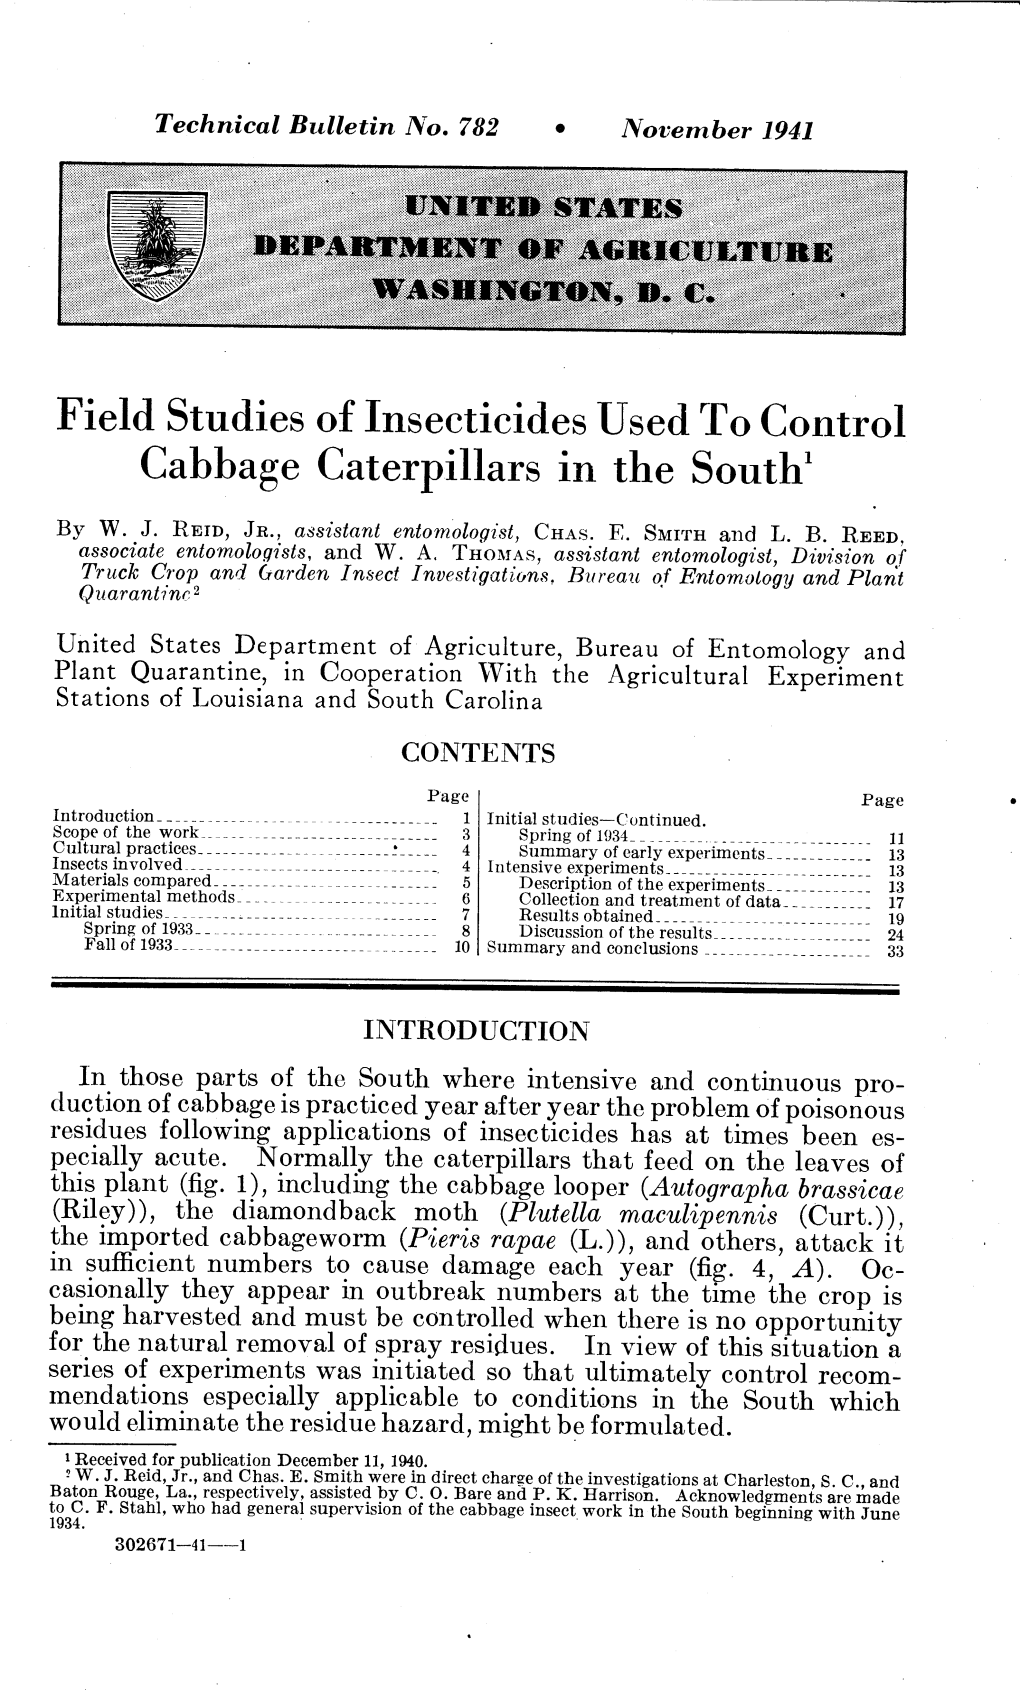 Field Studies of Insecticides Used to Control Cabbage Caterpillars in the South'